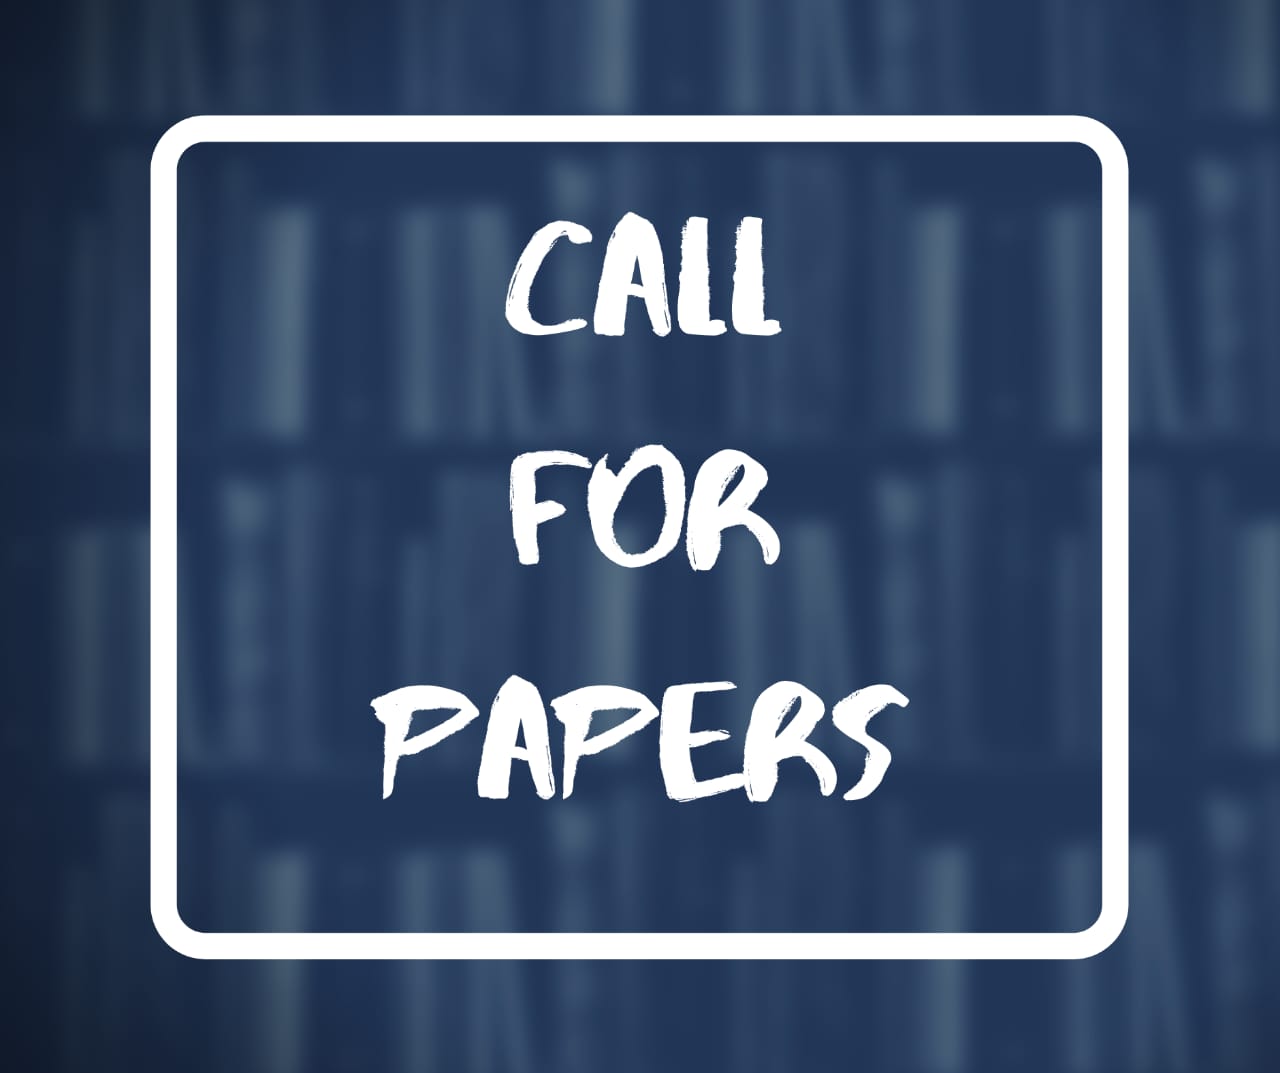 Call for Papers: White Black Legal Journal of Law (Vol 2, Issue 15, ISSN 2581-8503): Submit by July 24